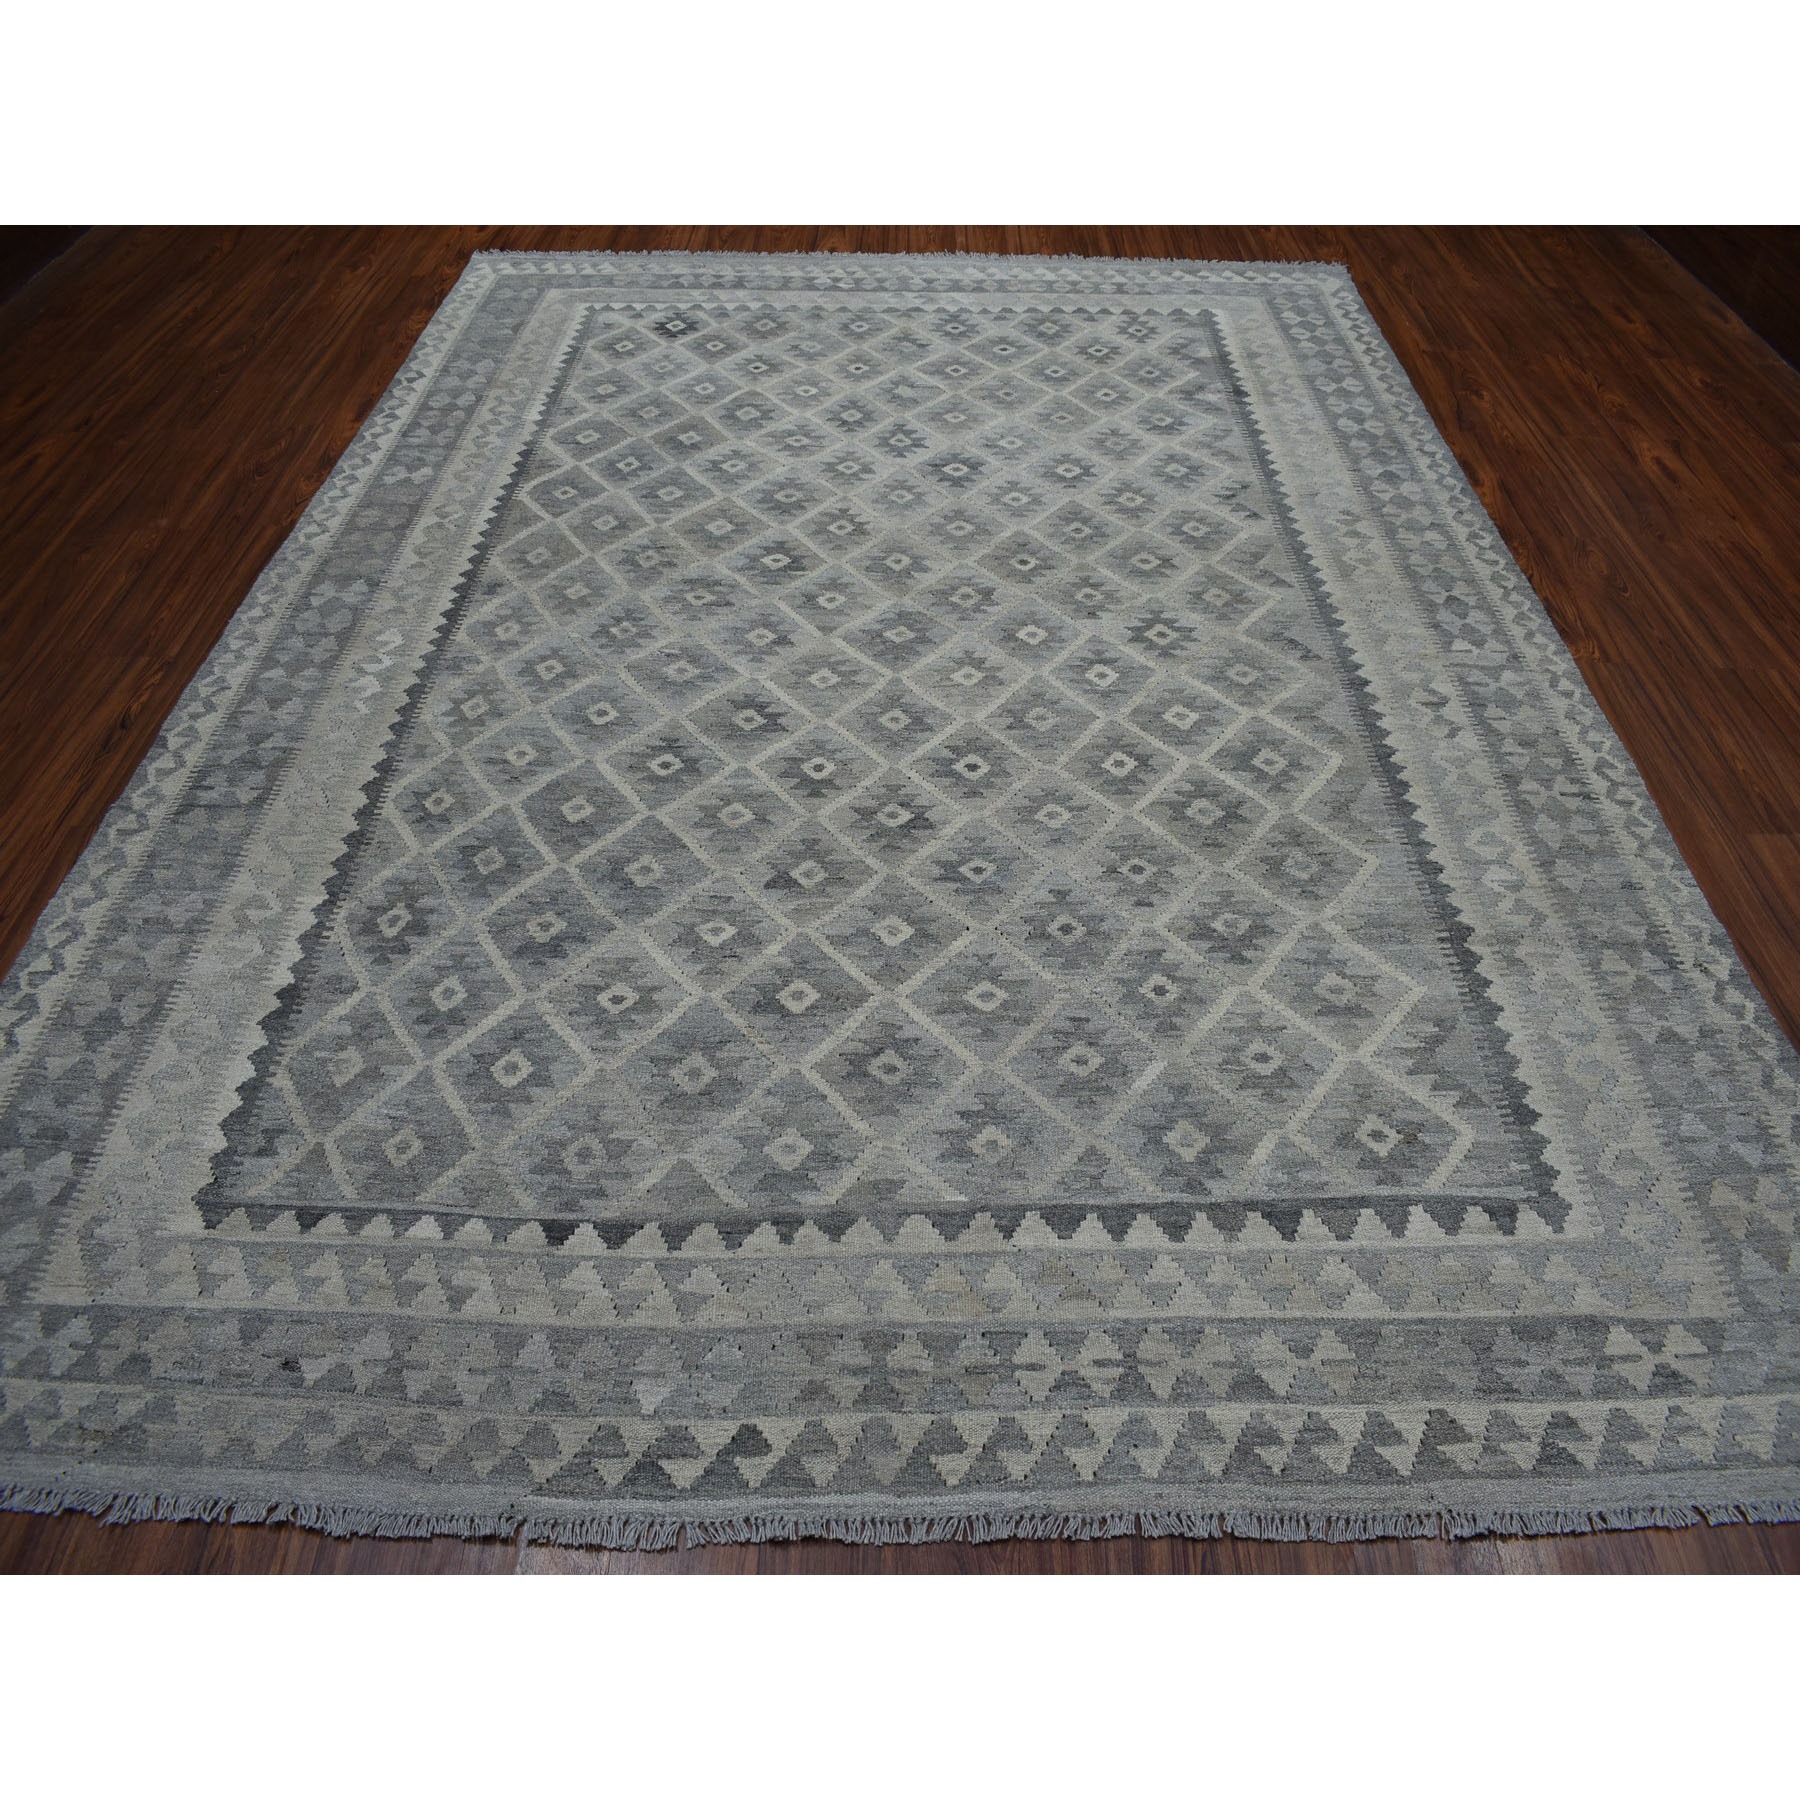 8-4 x11-3  Undyed Natural Wool Afghan Kilim Reversible Hand Woven Oriental Rug 